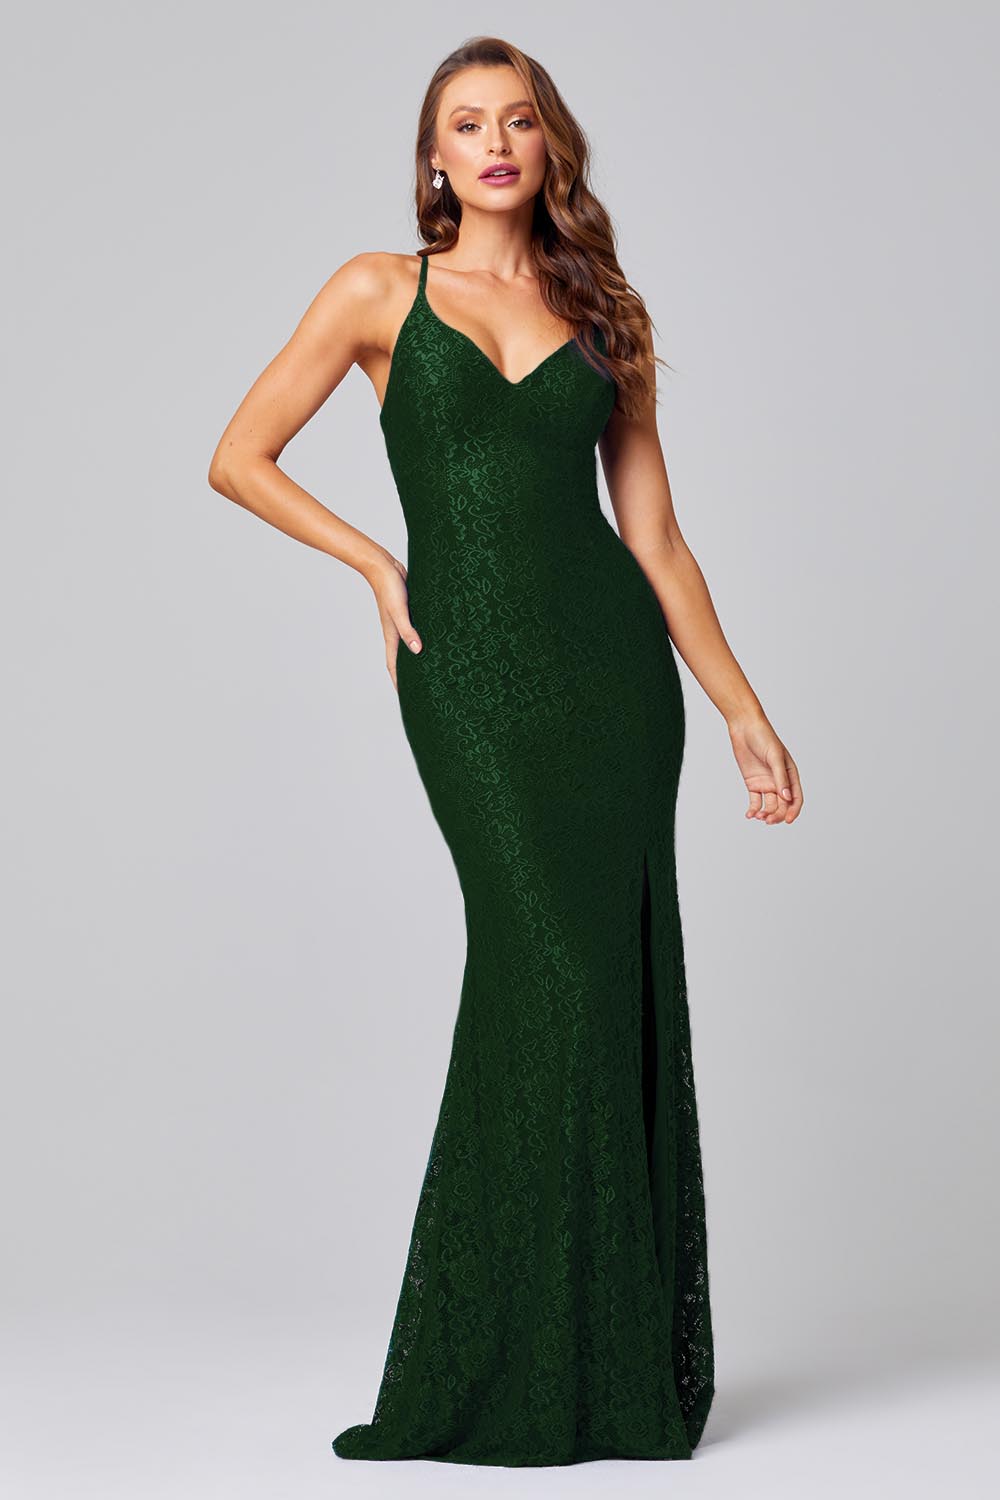 Formal Dress Hire » A Boutique Dress For Every Occasion @ONS